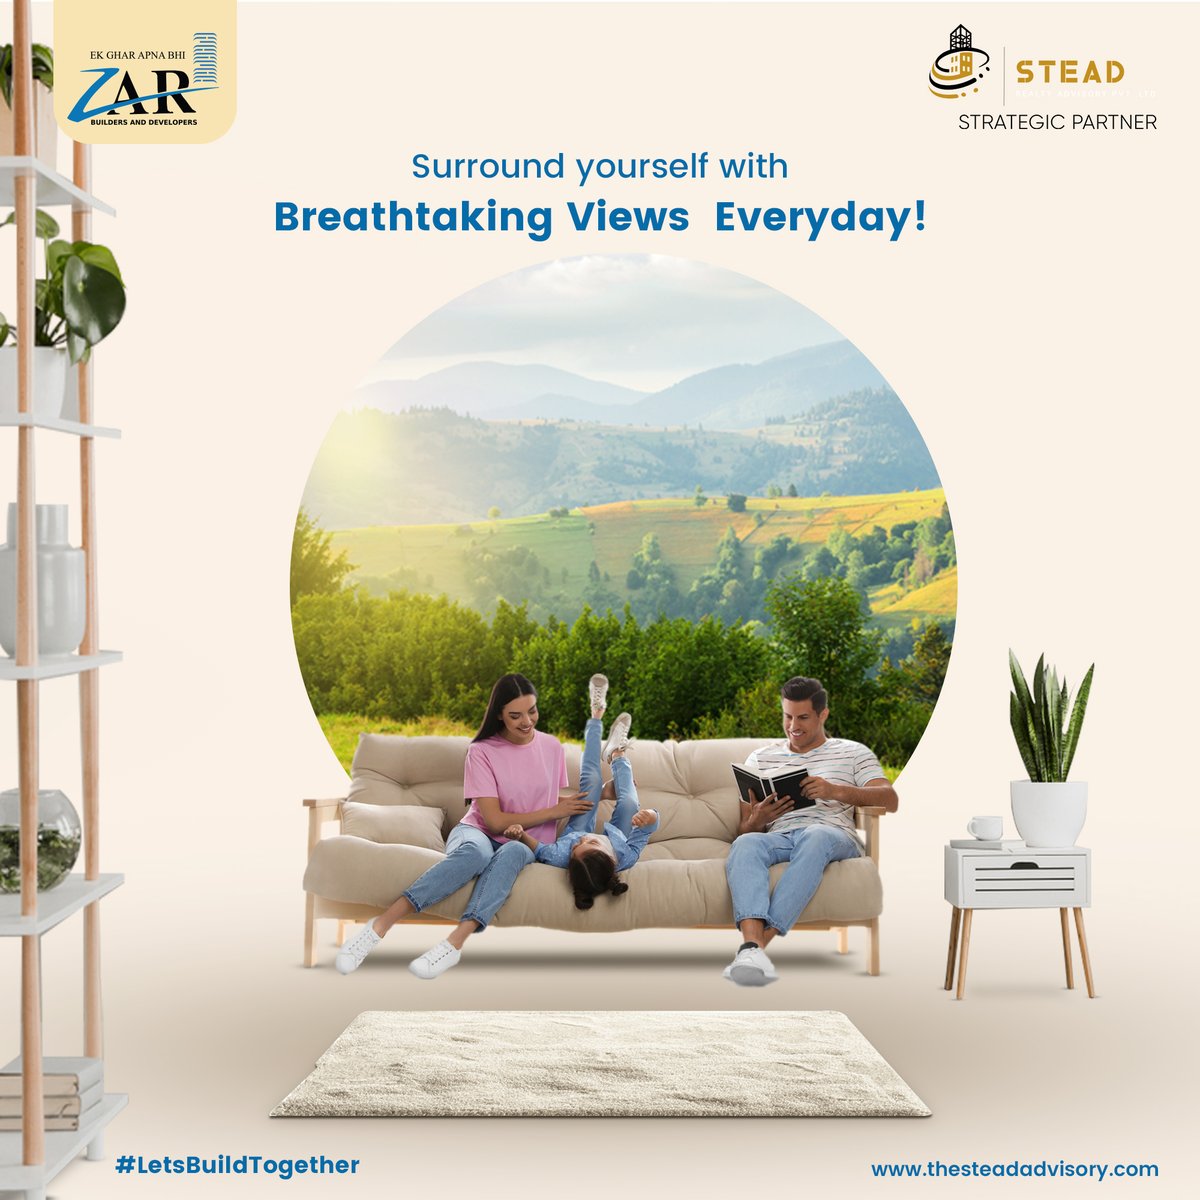 Wake up to a panoramic view everyday at Zar and capture the moments of bliss!
.
.
#SteadRealtyAdvisory #SteadRealty #RealEstate #RealEstateAdvisory #ZAR #ZarBuildersandDevelopers #LetsBuildTogether #LuxuryHomes #Lifestyle #ModernAmenities #SpaciousRooms #Vasai #VasaiEast